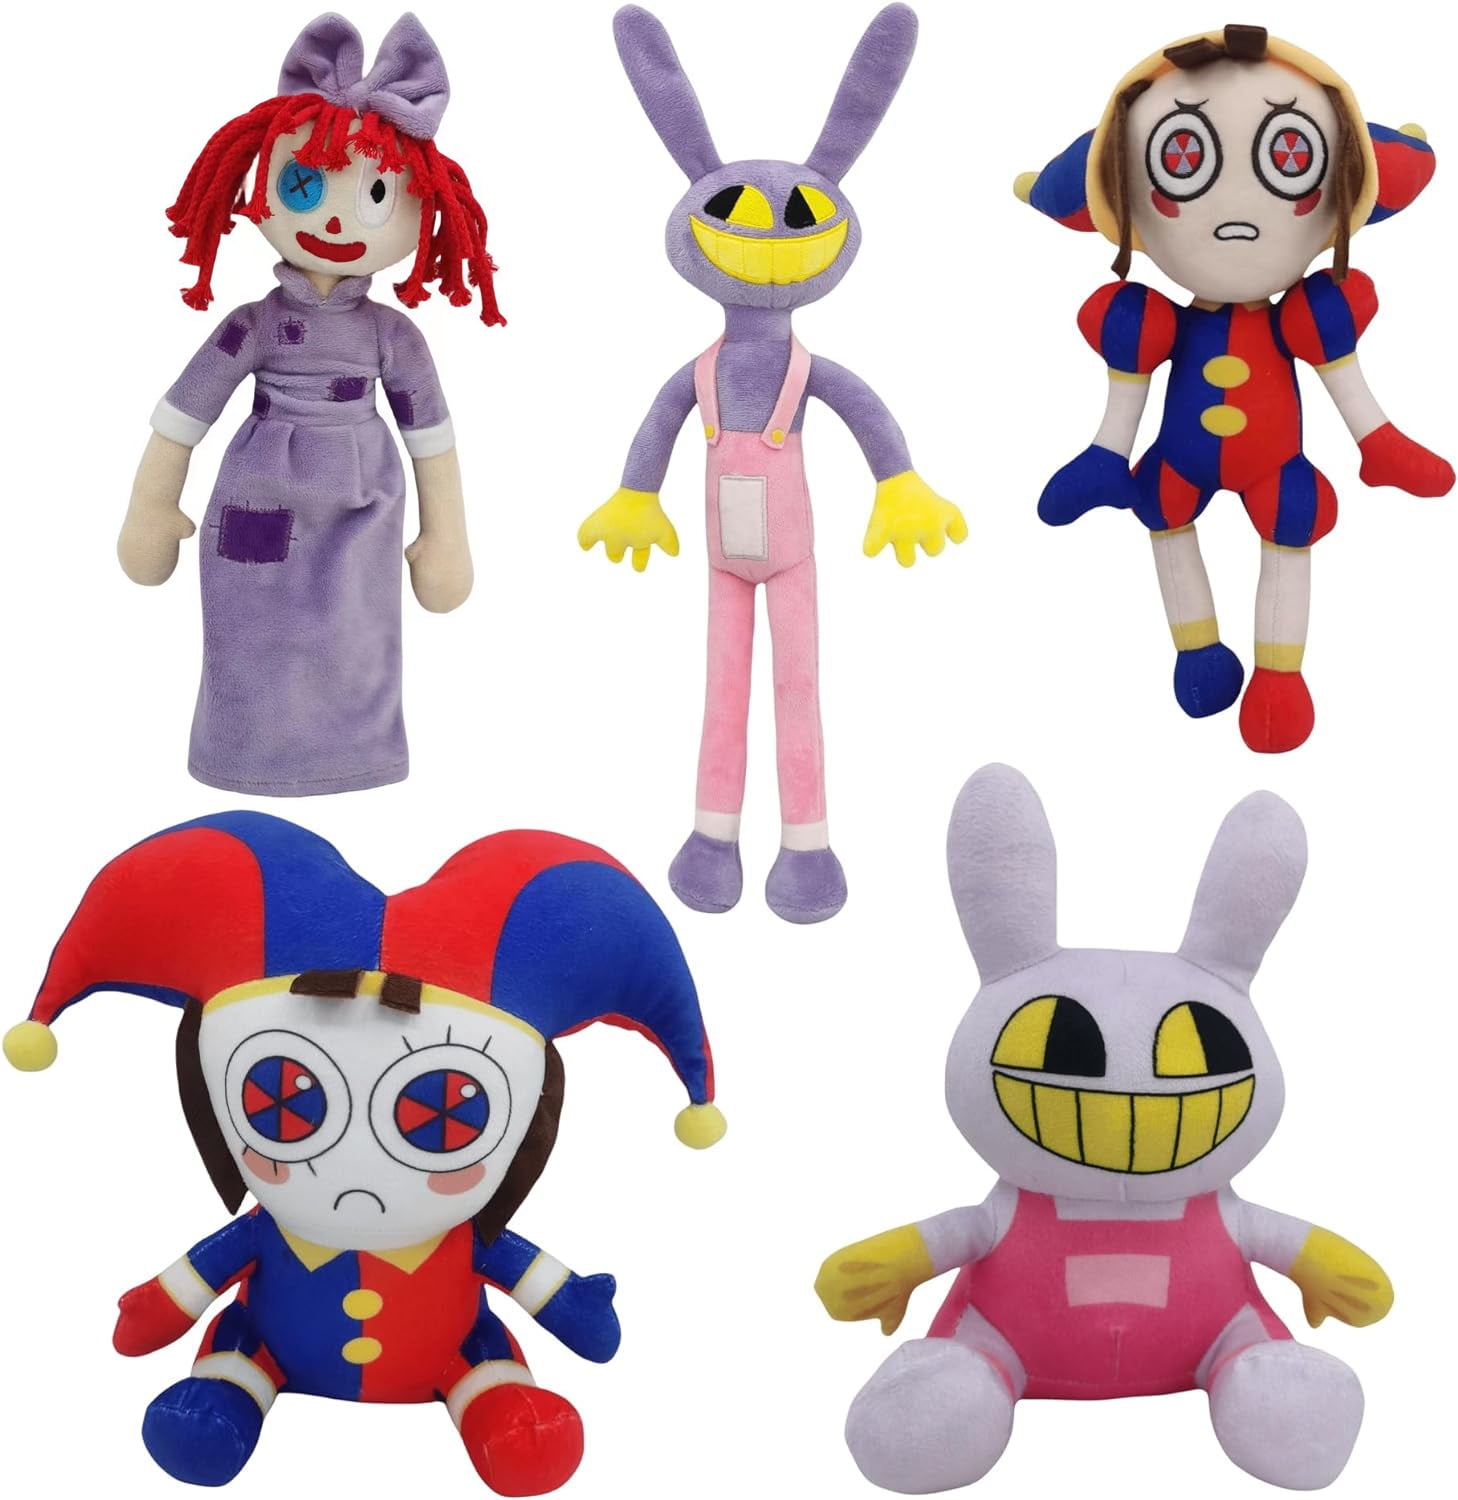 MKWIFKU 2 PCS The Amazing Digital Circus Plush,11.8 inch Pomni Plushies Toy  for TV Fans Gift, Cute Stuffed Figure Doll for Kids and Adults,Birthday